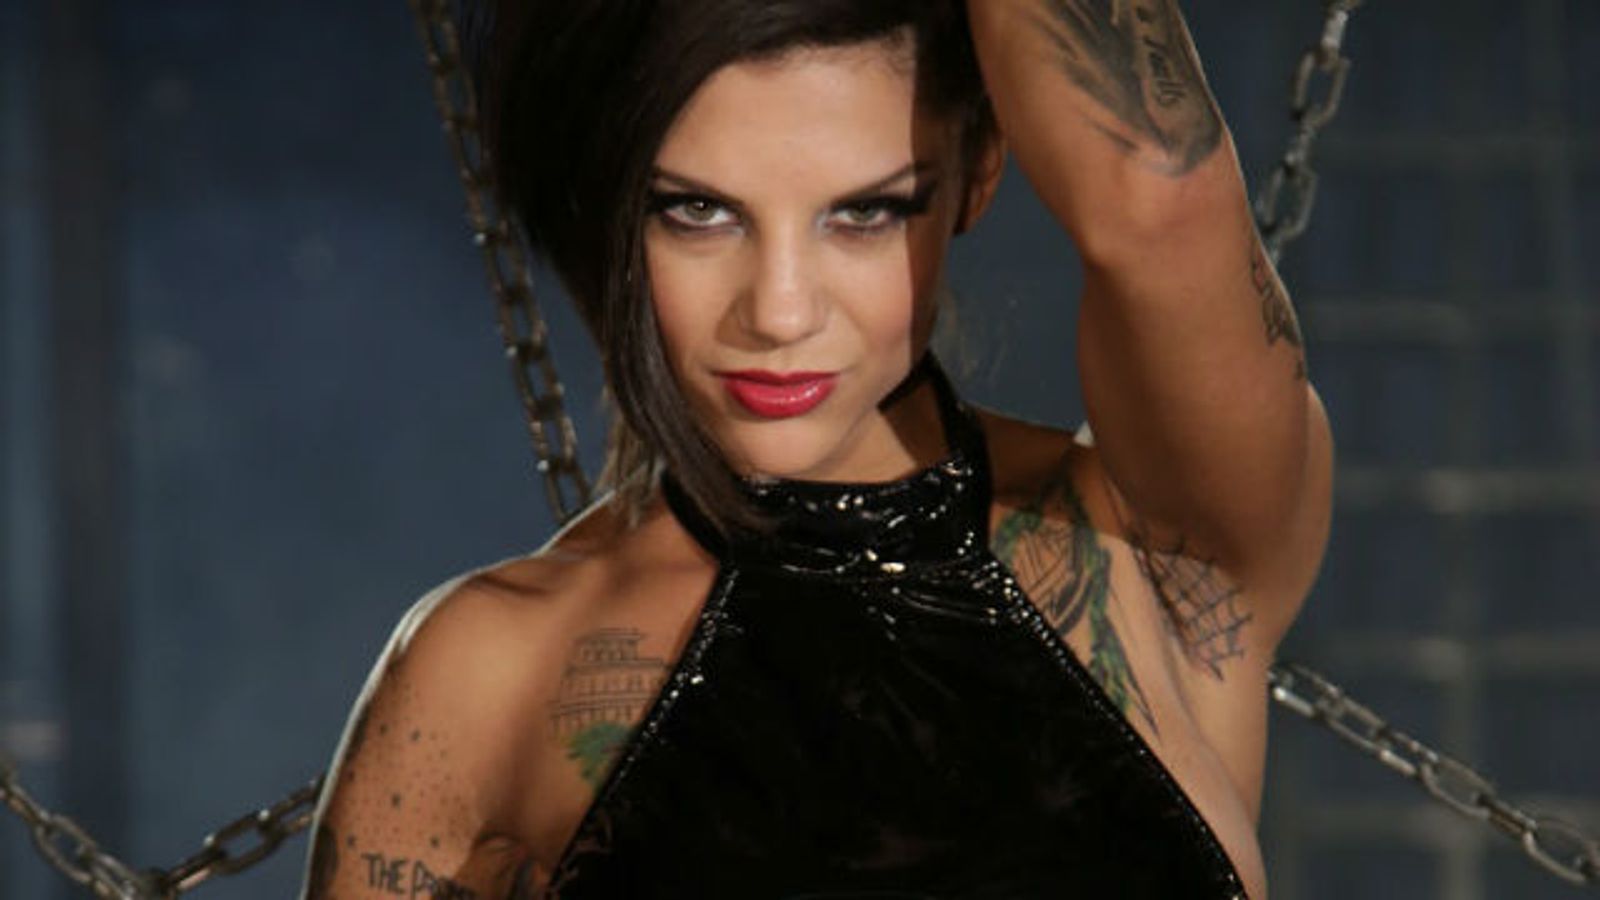 Bonnie Rotten's Global Webcam Show is This Wednesday